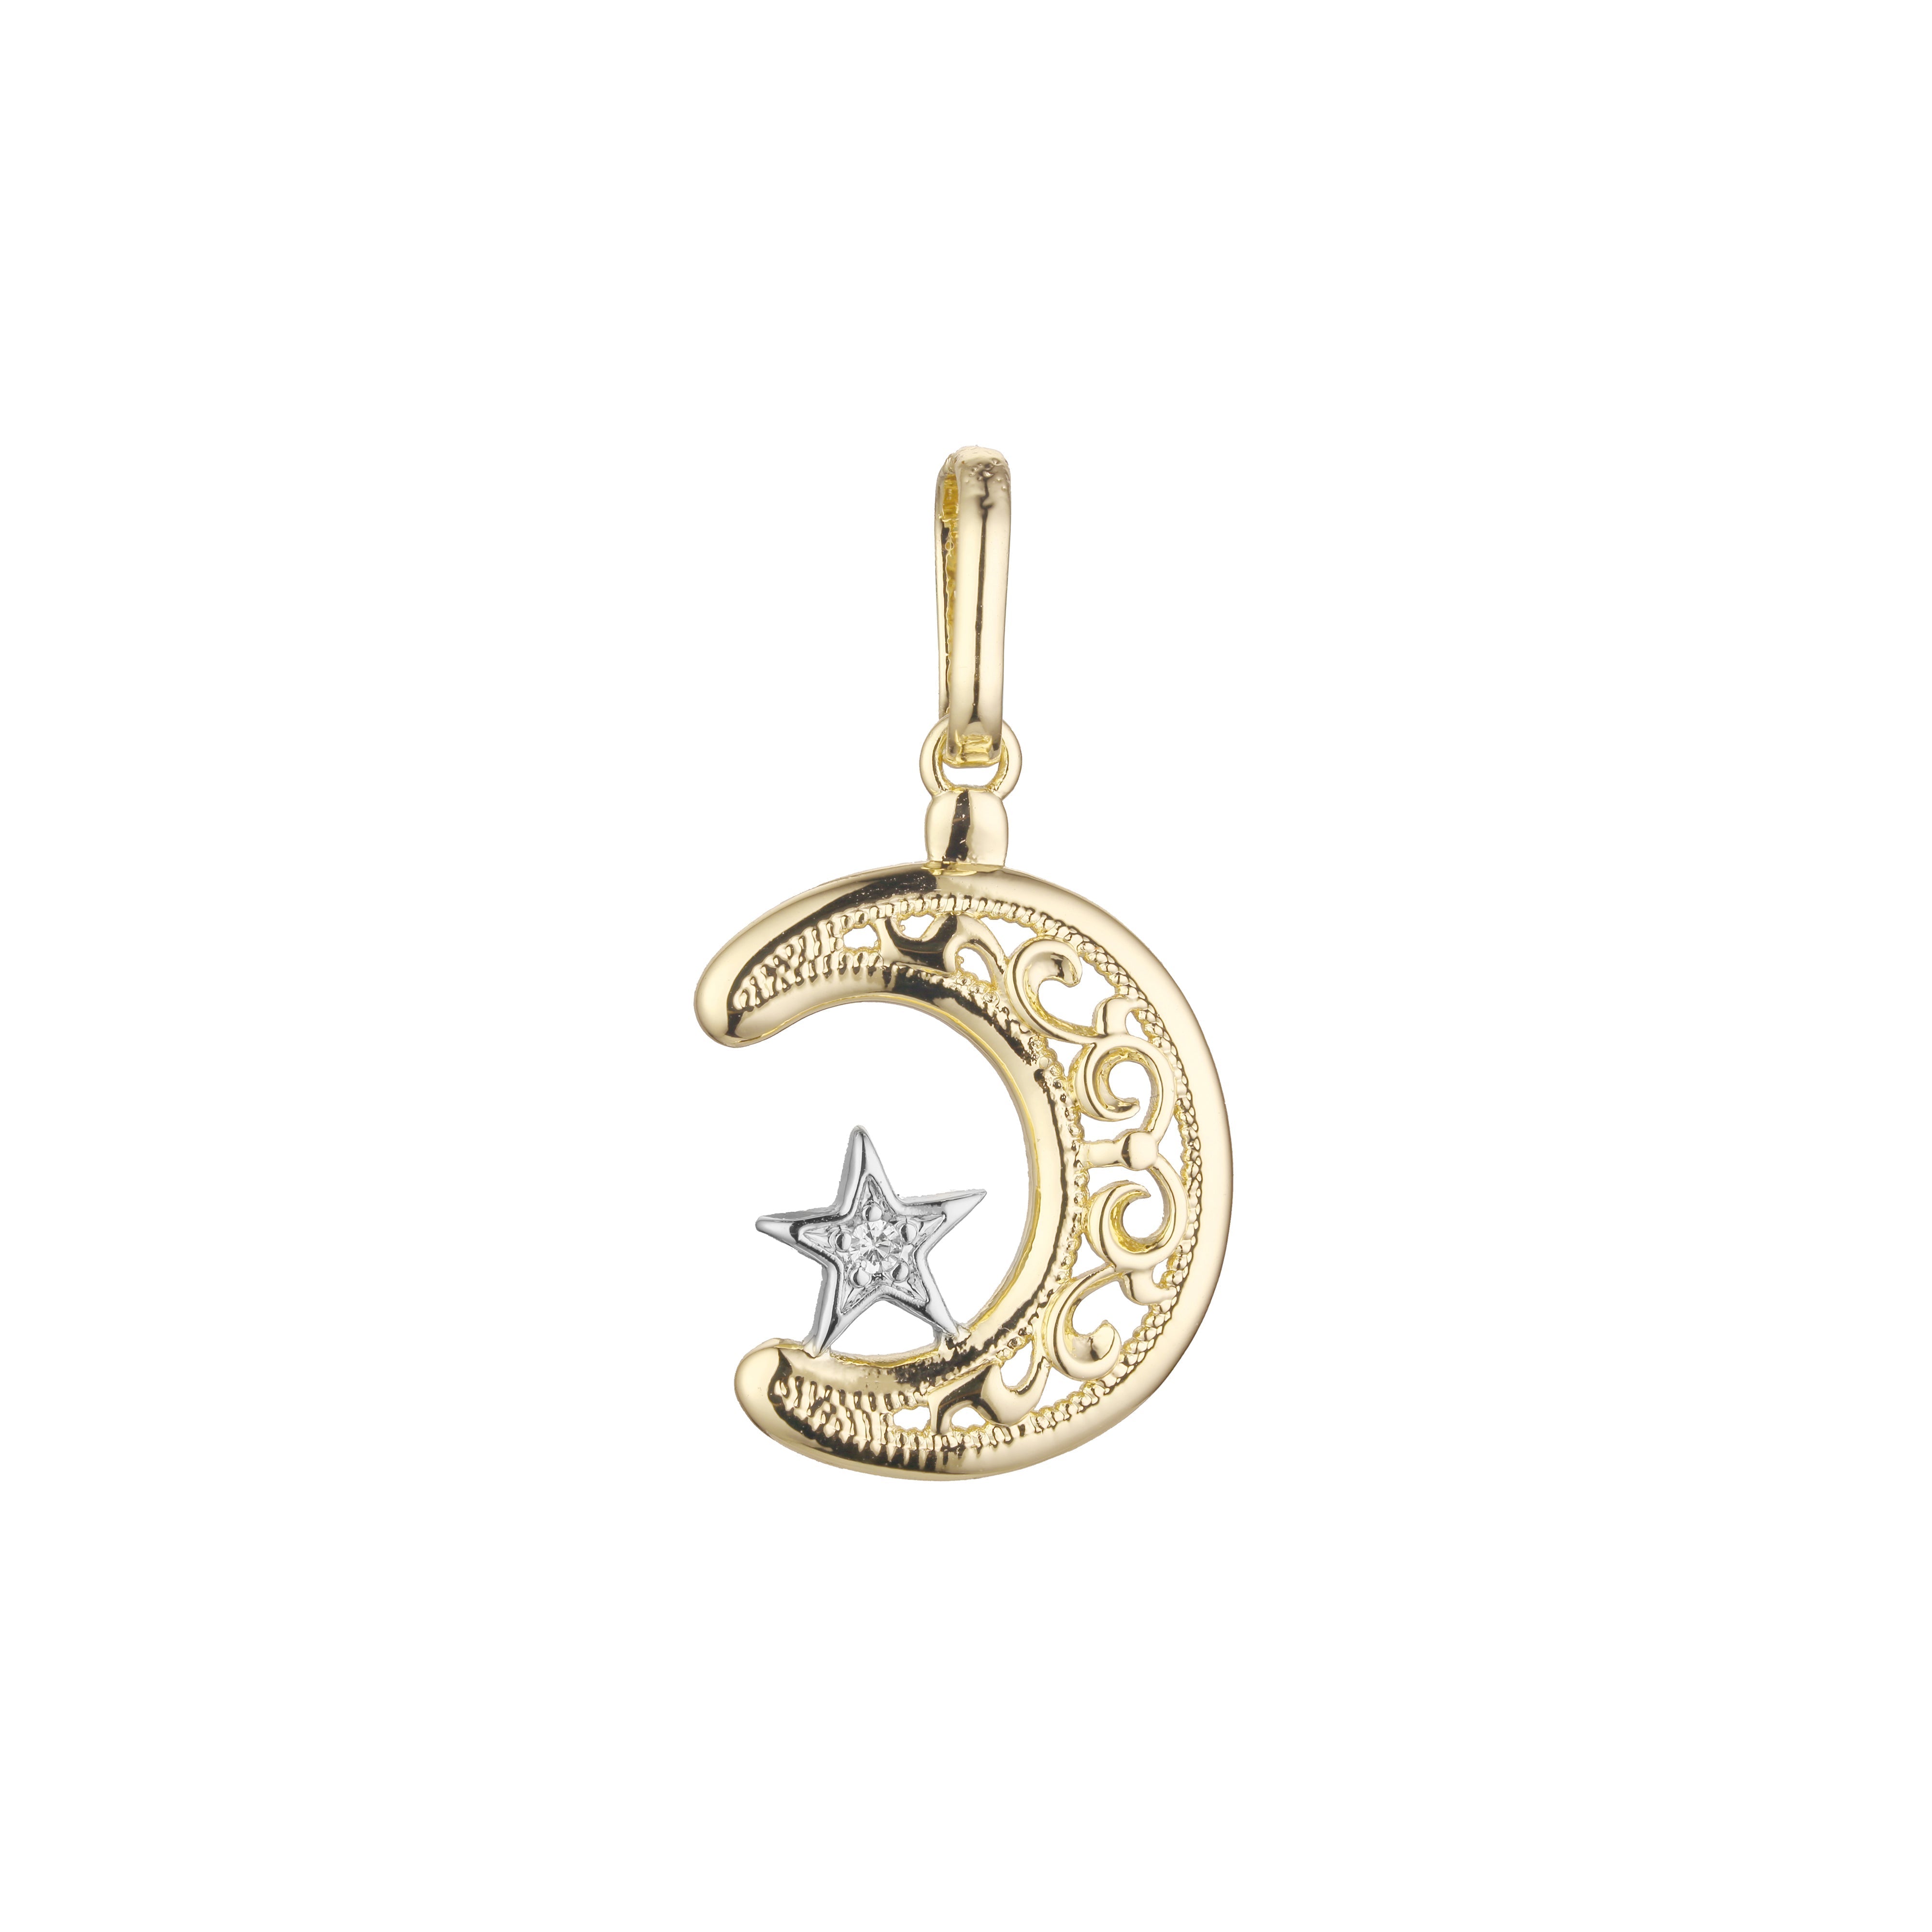 Star and Crescent moon Islamic Rose Gold, 14K Gold two tone, White Gold pendant